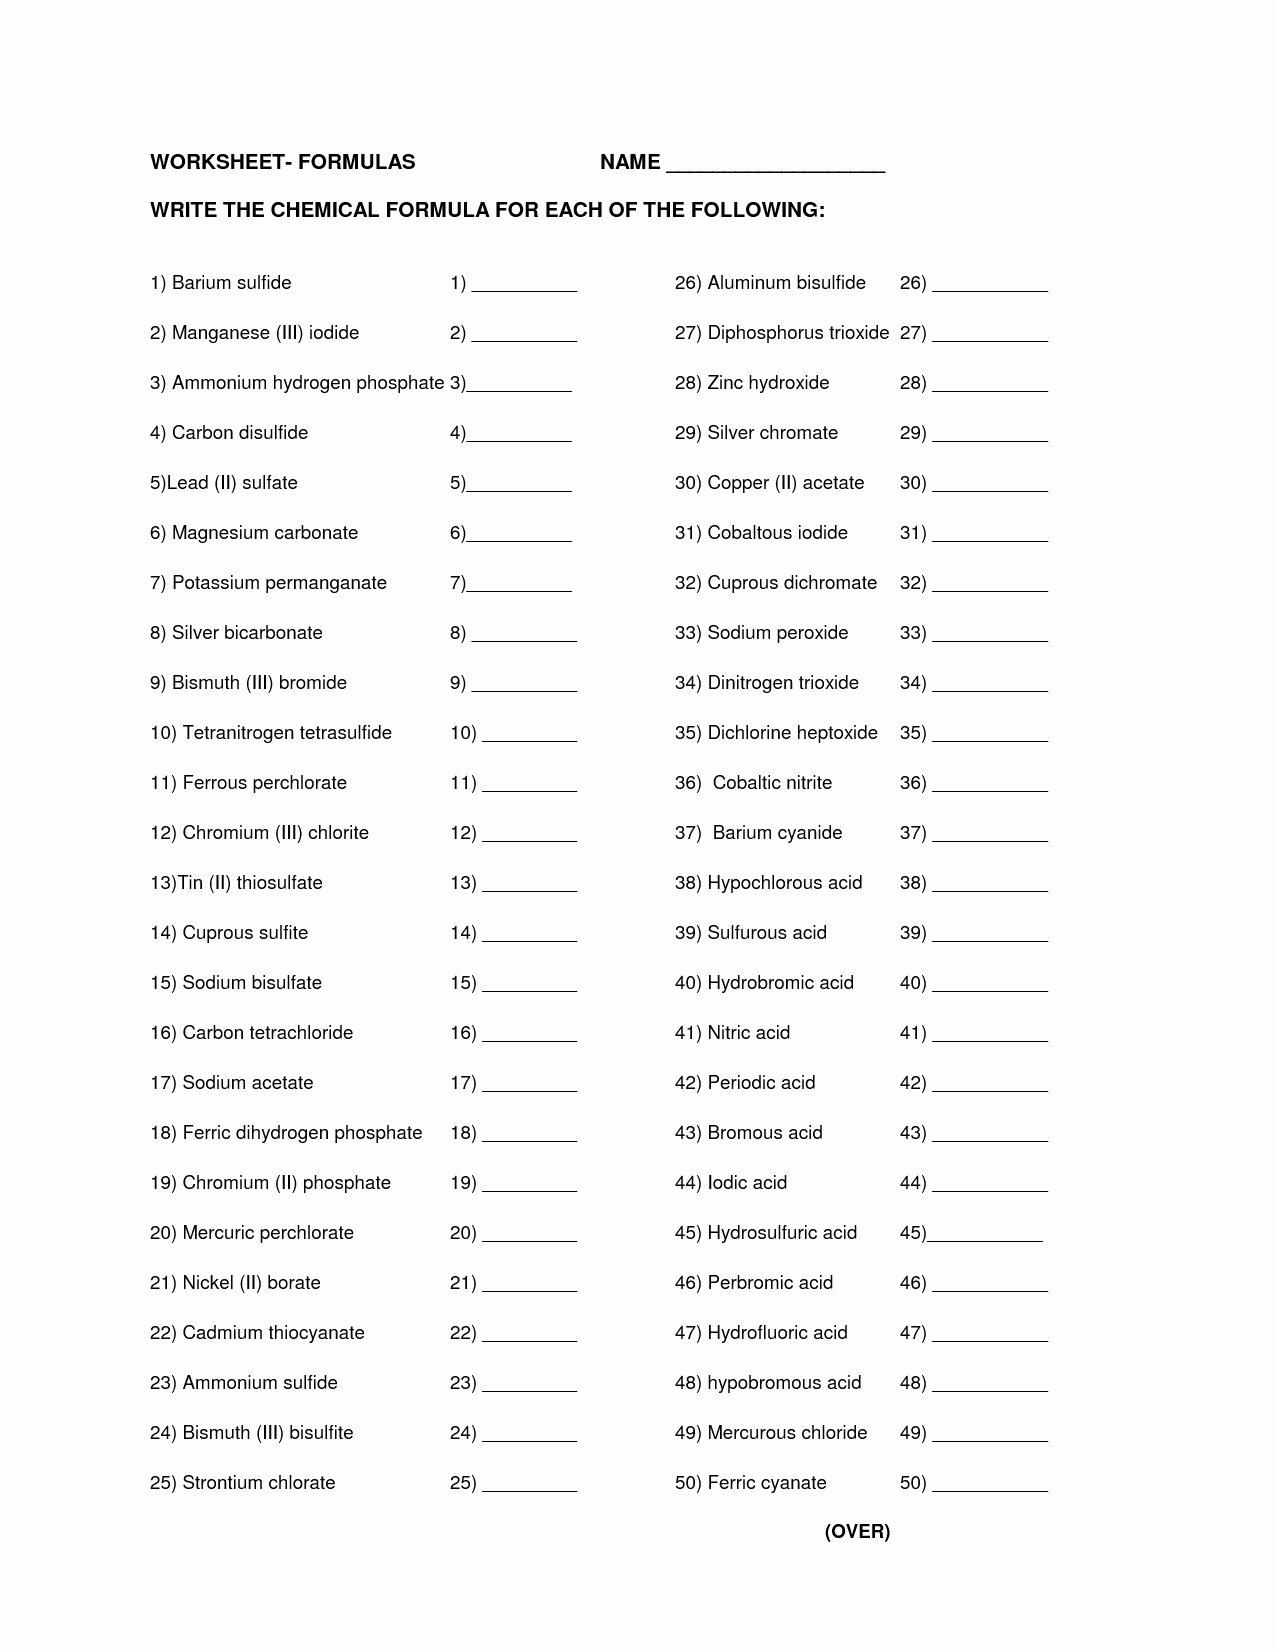 Chemical formula Worksheet Answers Best Of 52 Chemical formula Writing Worksheet Answers Criss Cross